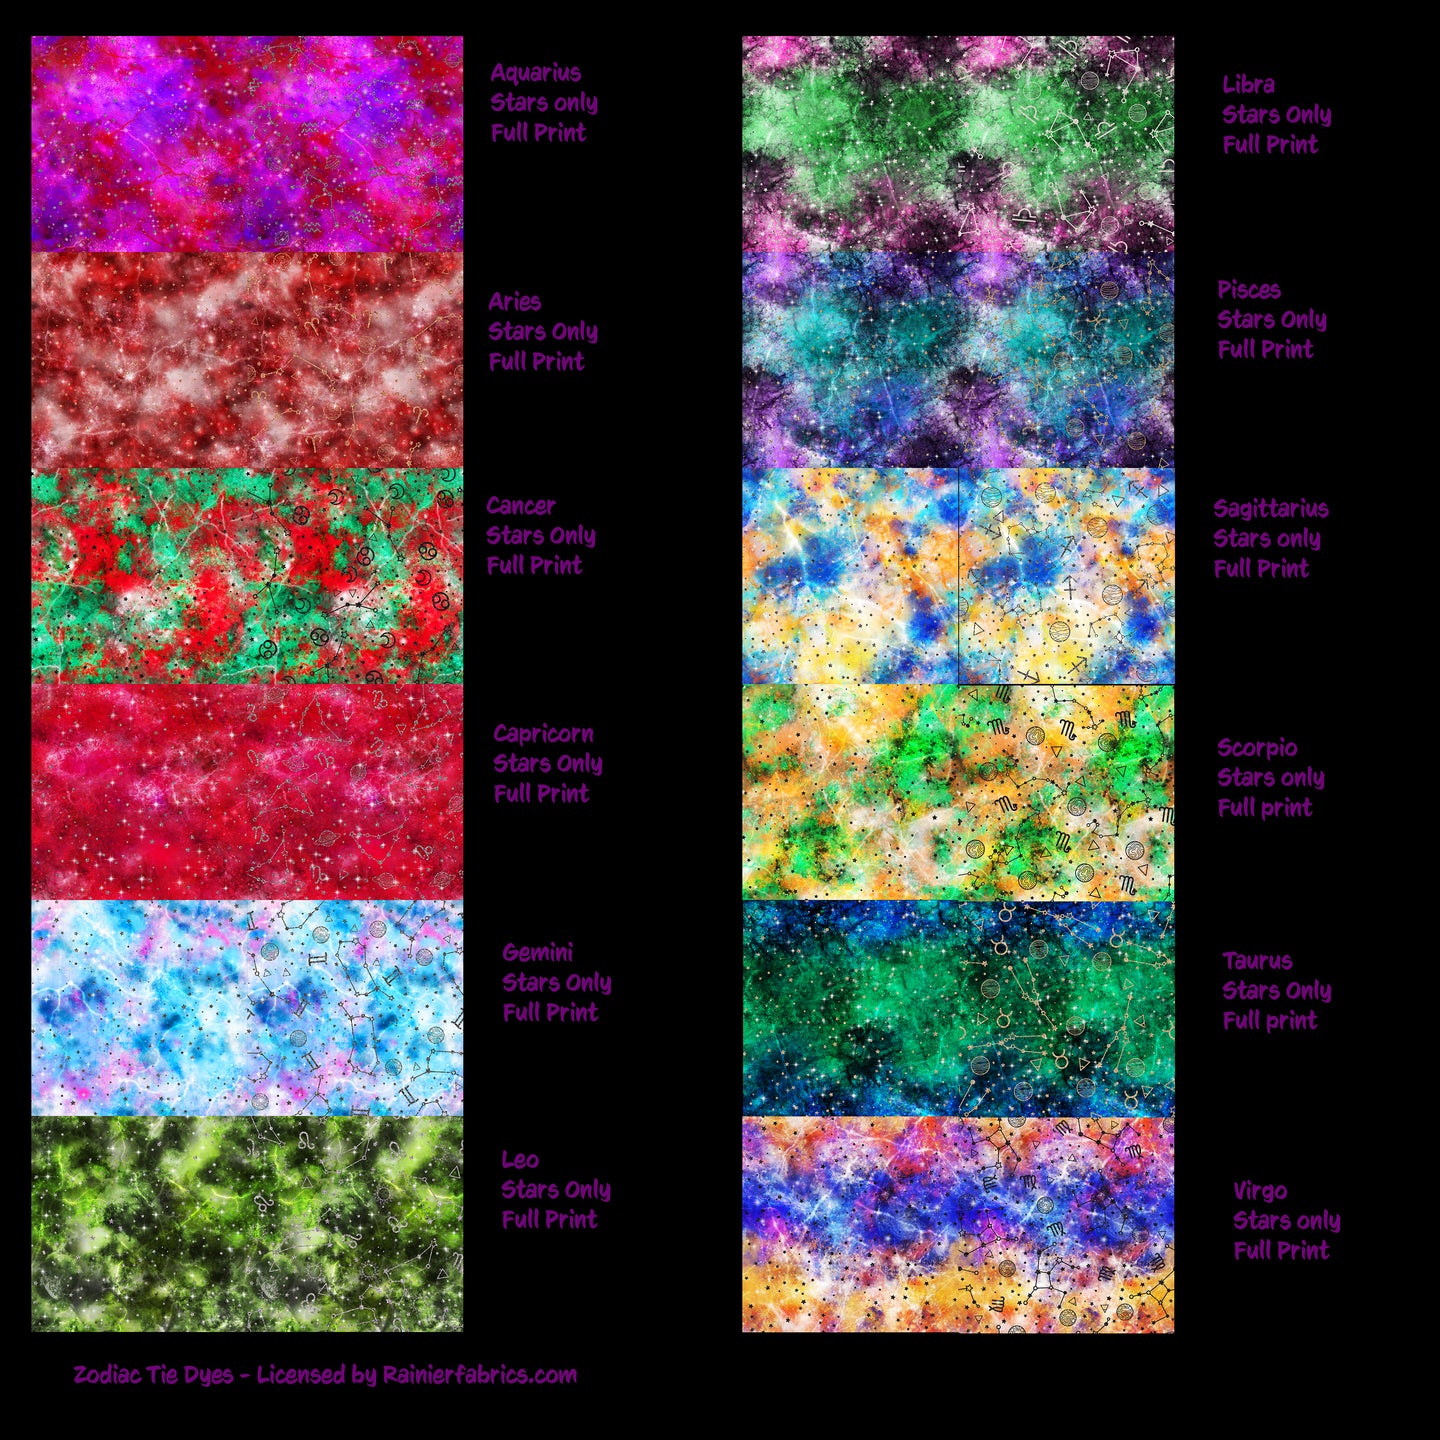 Zodiac Tie Dyes - 2-5 day turnaround - Order by 1/2 yard; Description of bases below